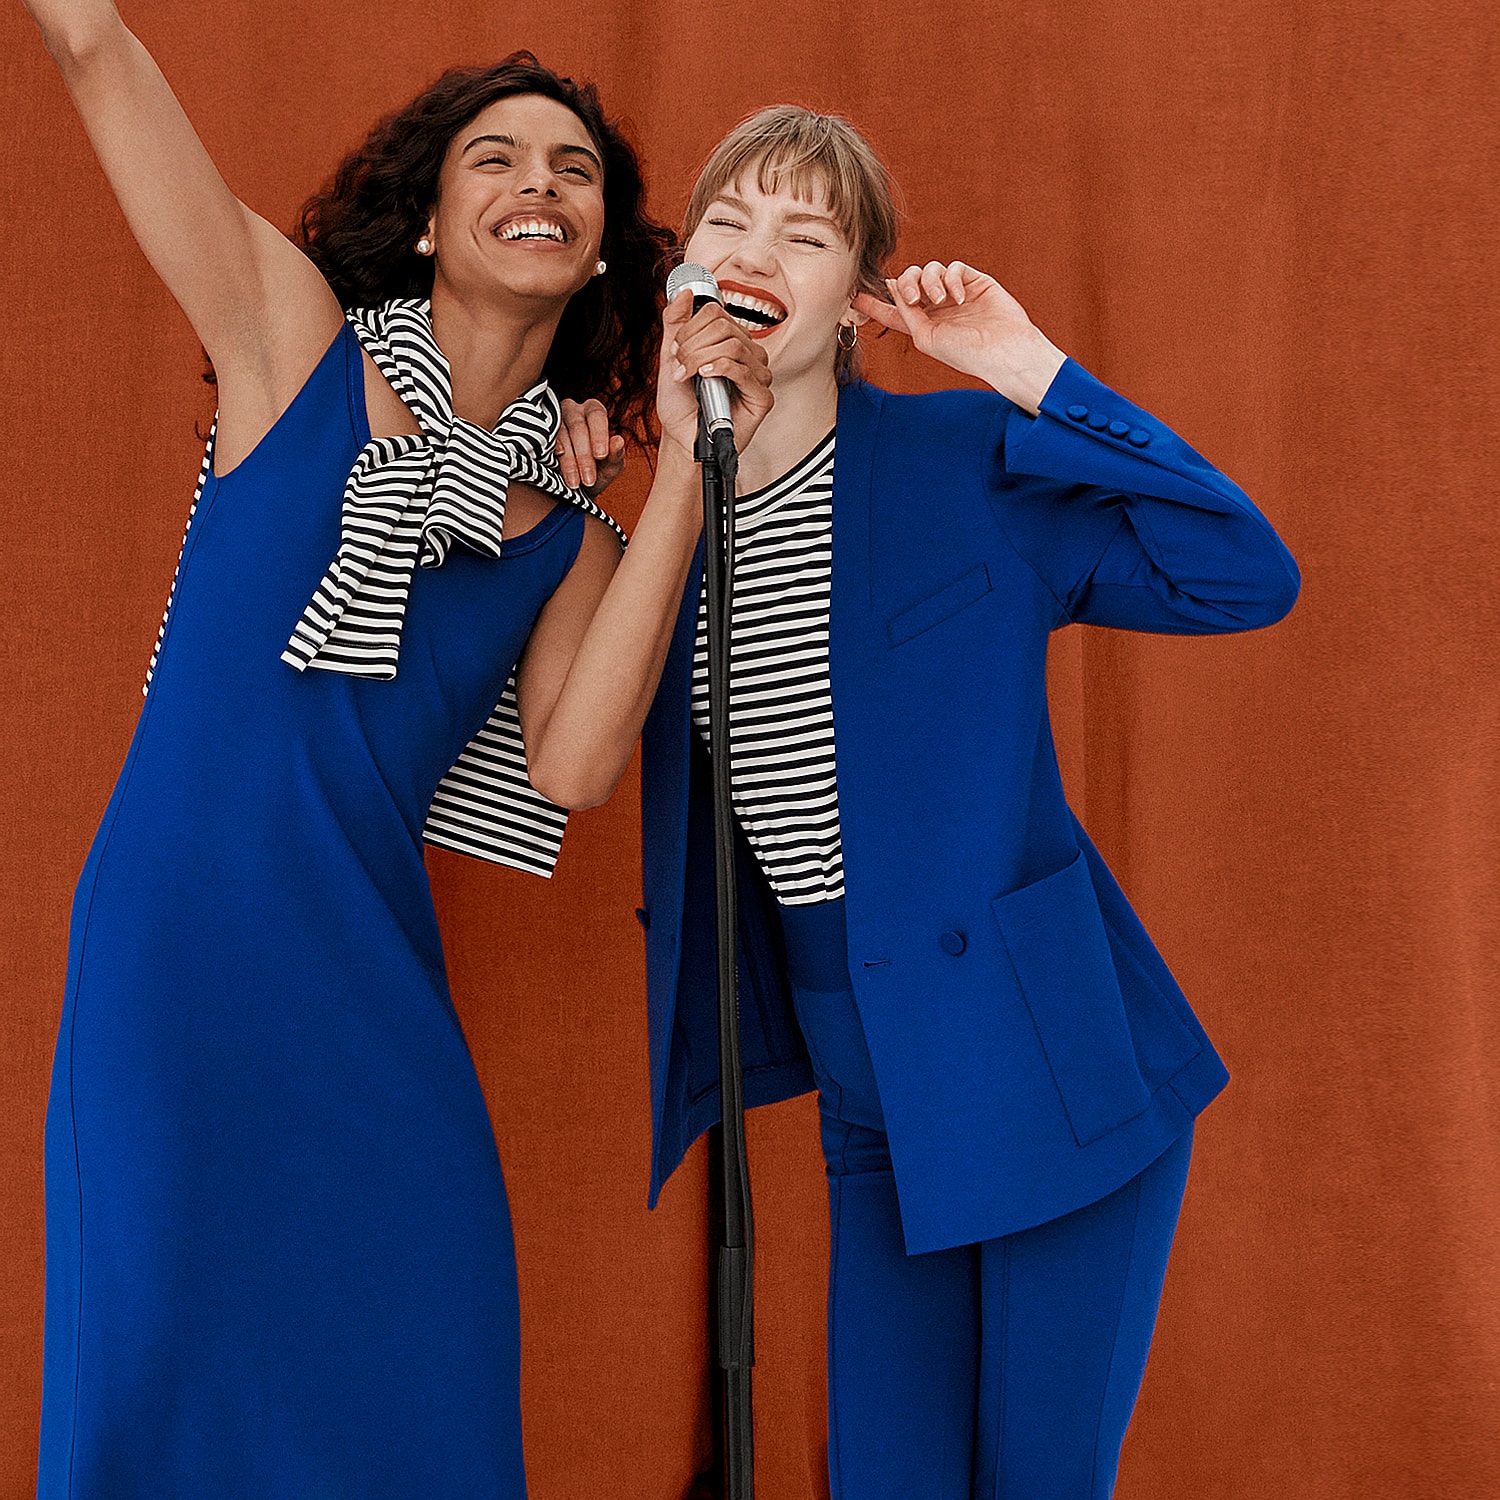 image of 2 women wearing electric blue outfits singing into a microphone